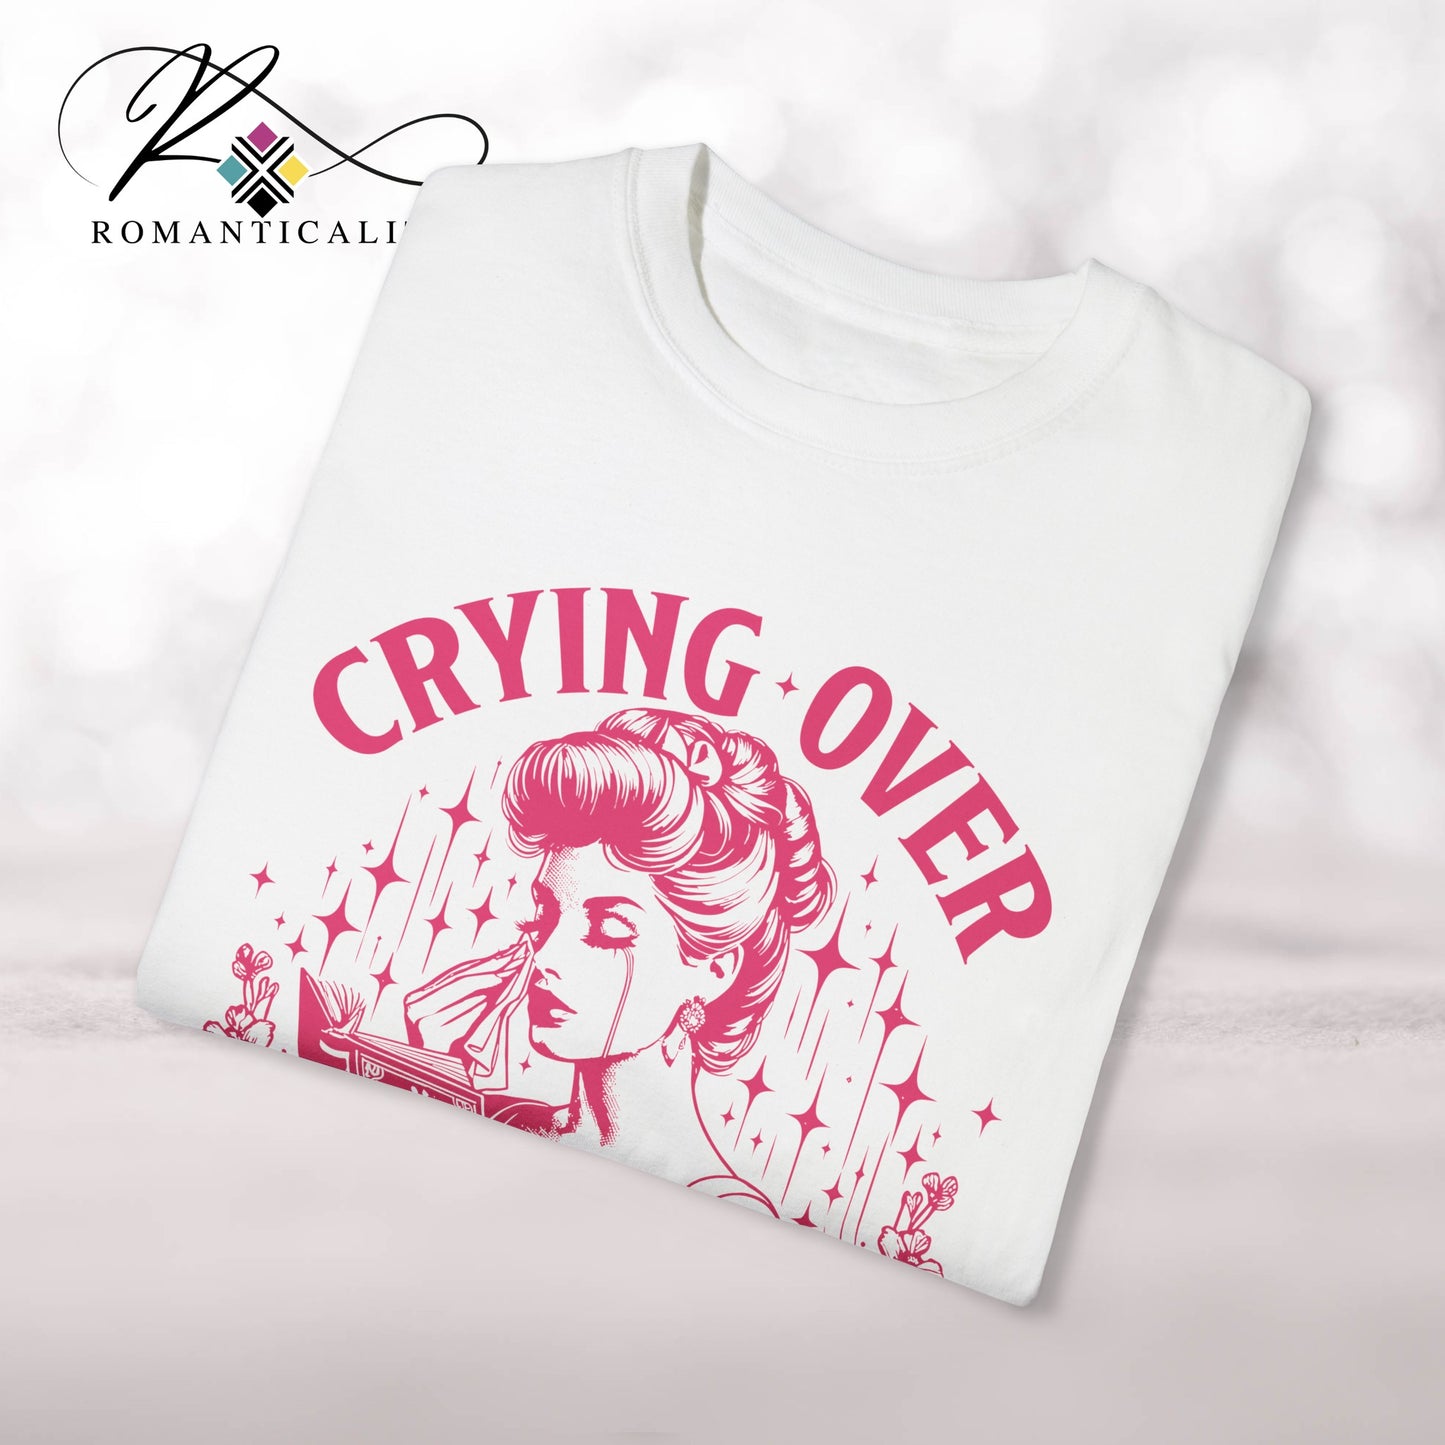 Crying Over Book Boyfriend Shirt-Comfortable Book Lover Graphic Tee-Gift for Readers/Writers